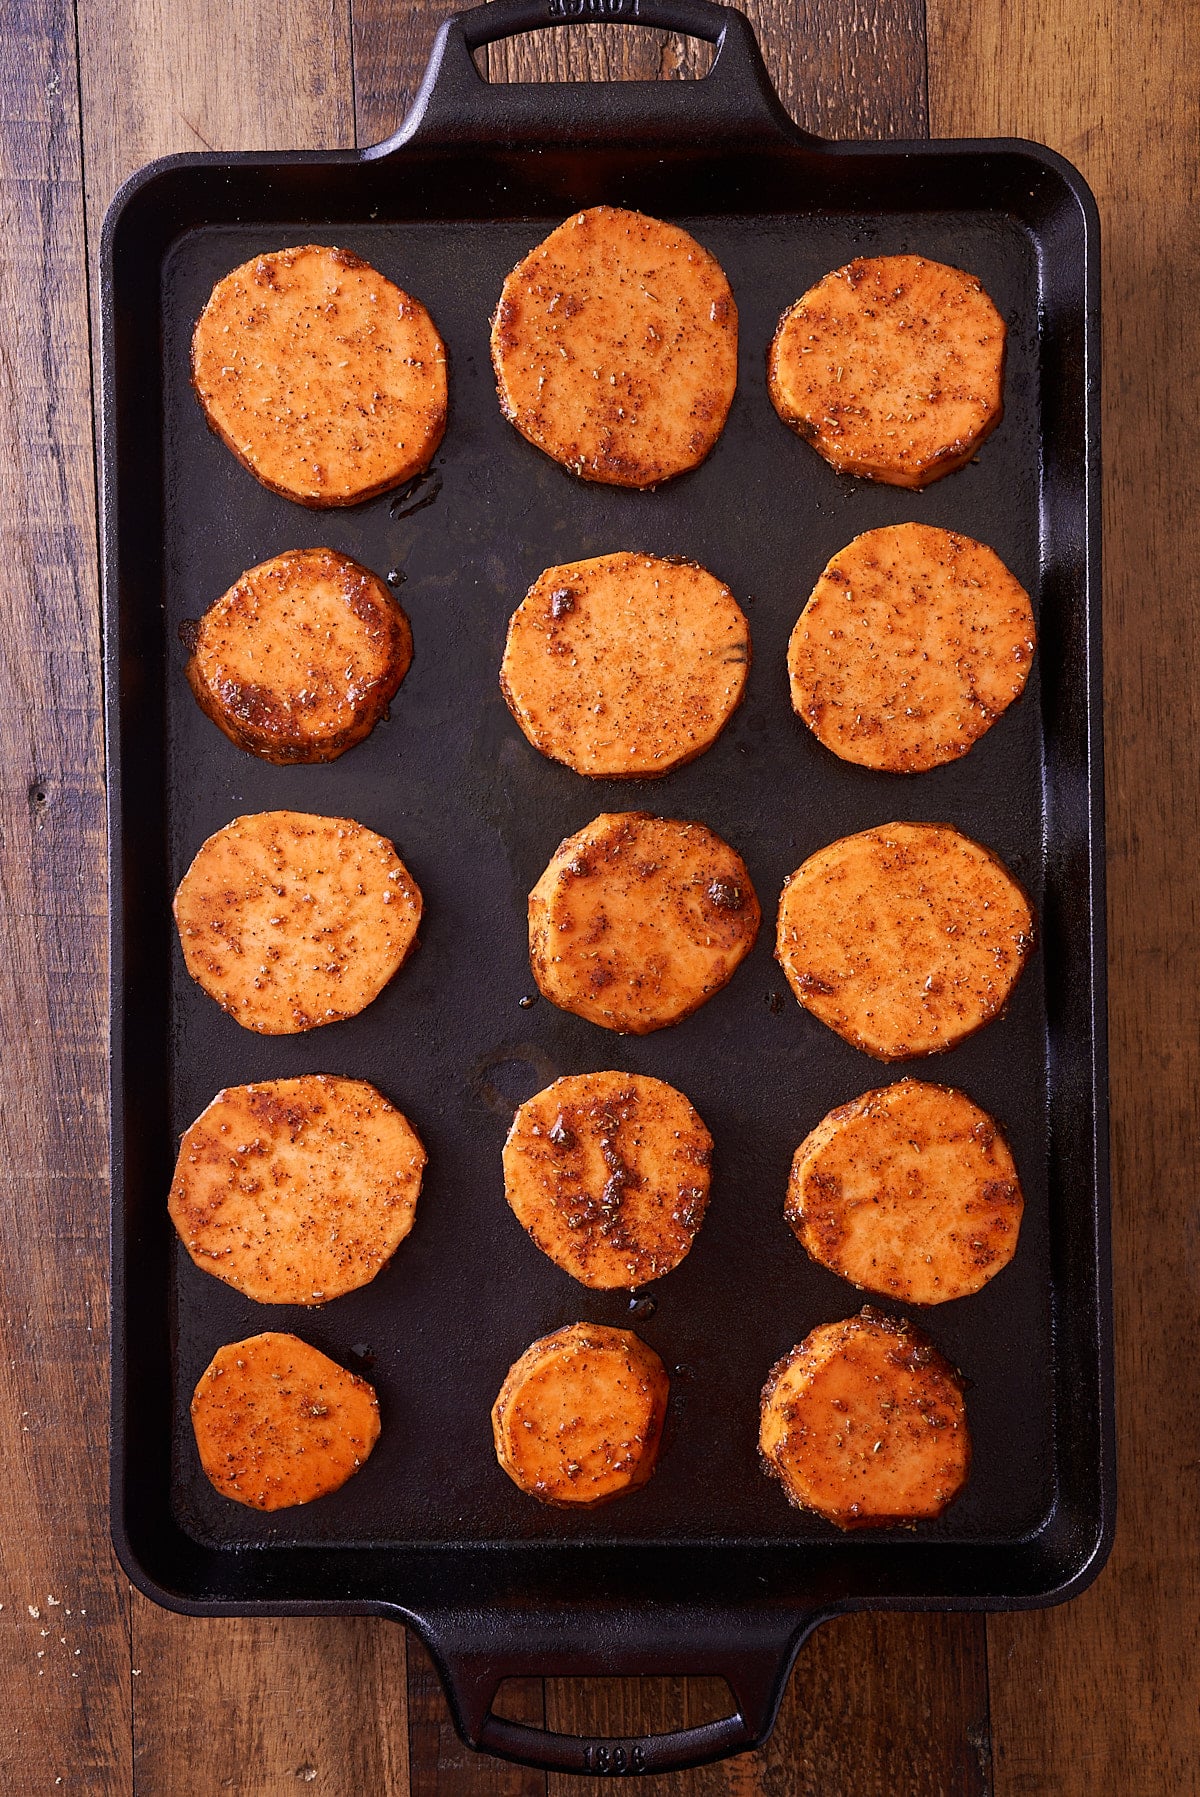 Sweet potato rounds coated in a spiced oil, set onto a prepared baking sheet ready for the oven.